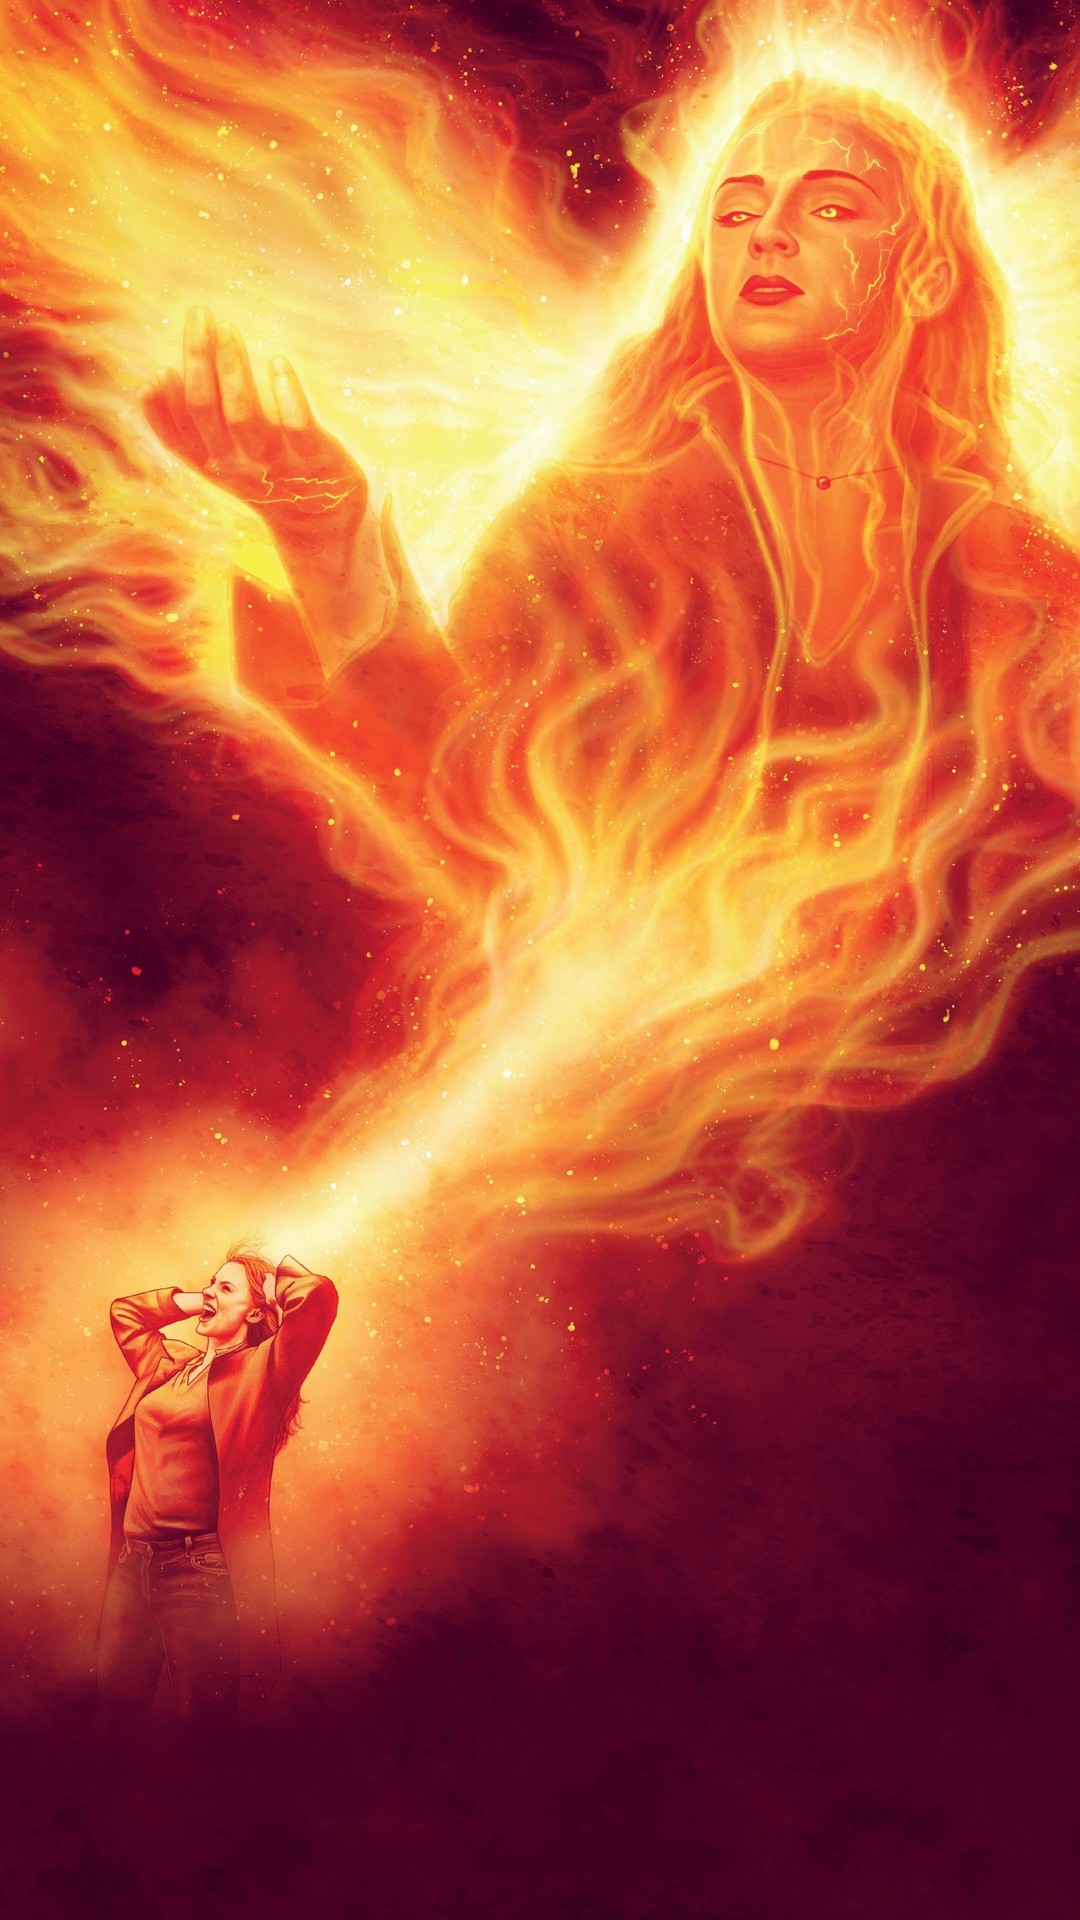 Dark Phoenix 2019 iPhone X Wallpaper HD with high-resolution 1080x1920 pixel. Download all Mobile Wallpapers and Use them as wallpapers for your iPhone, Tablet, iPad, Android and other mobile devices